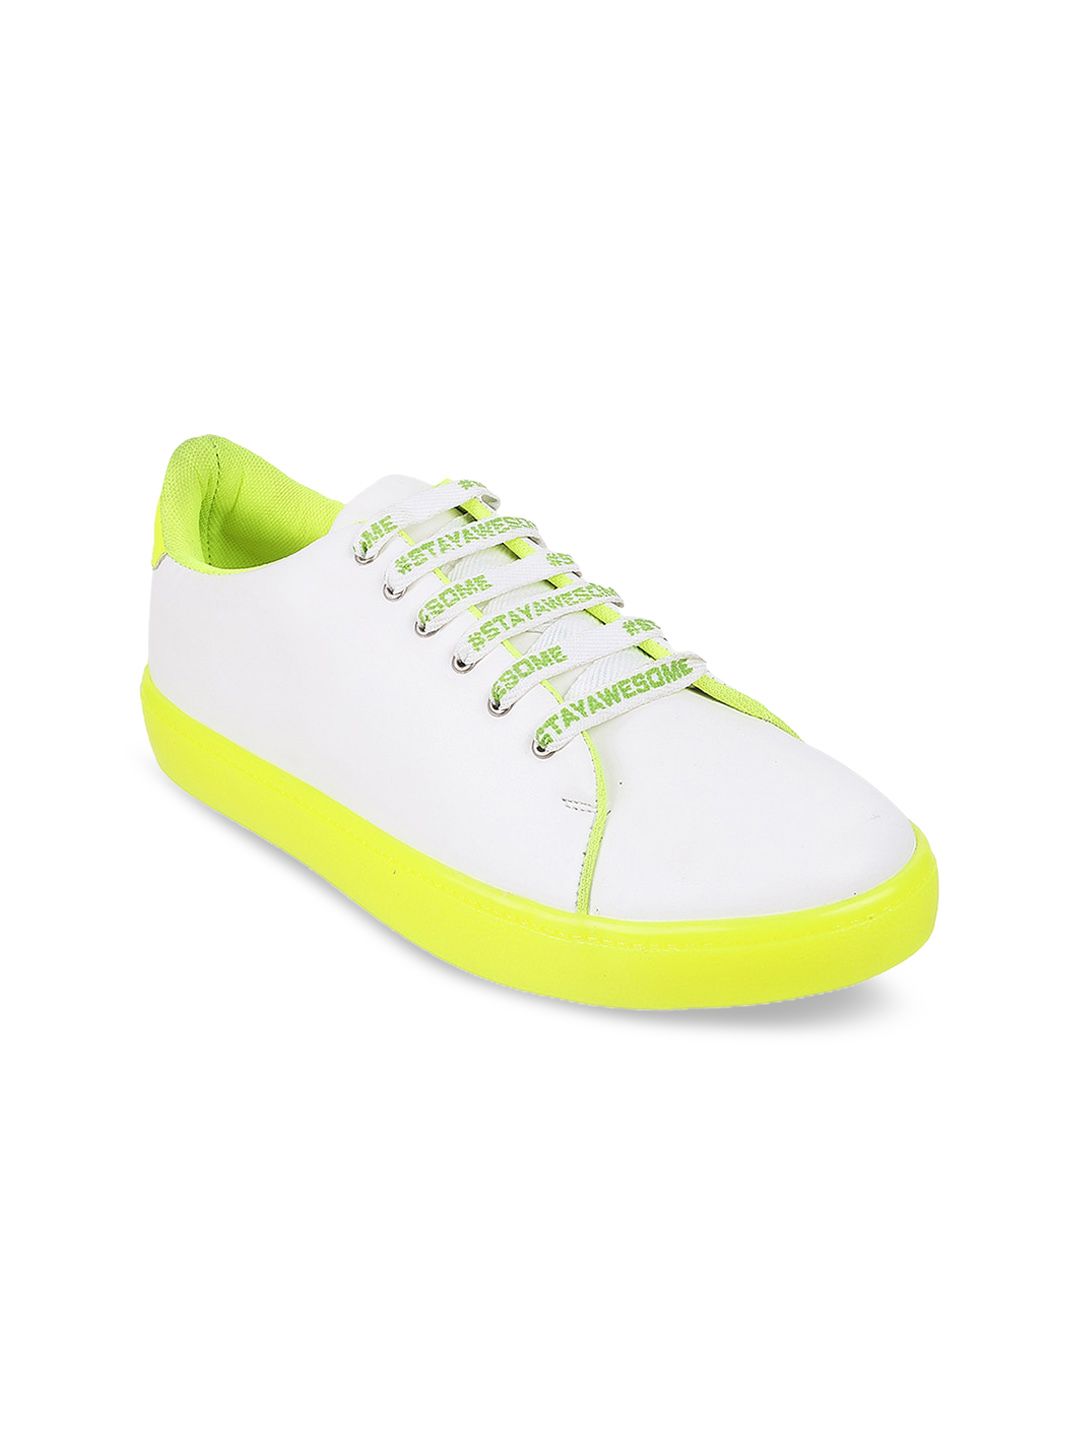 Mochi Women Green & White Lace-Up Sneakers Price in India